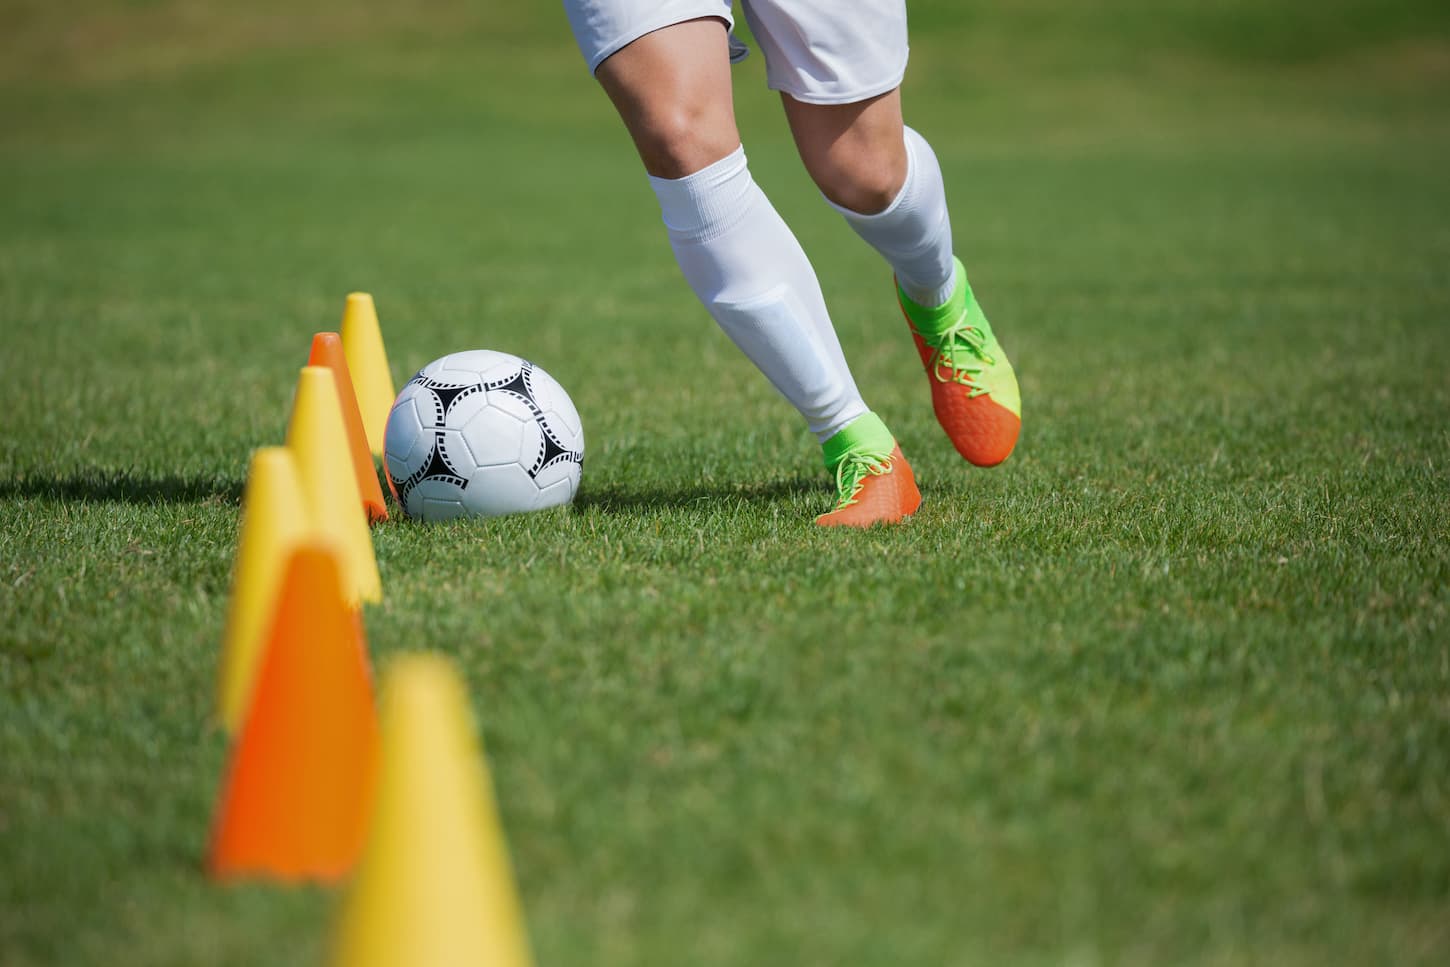 An image of a soccer player dribbling through the cones in a soccer field.